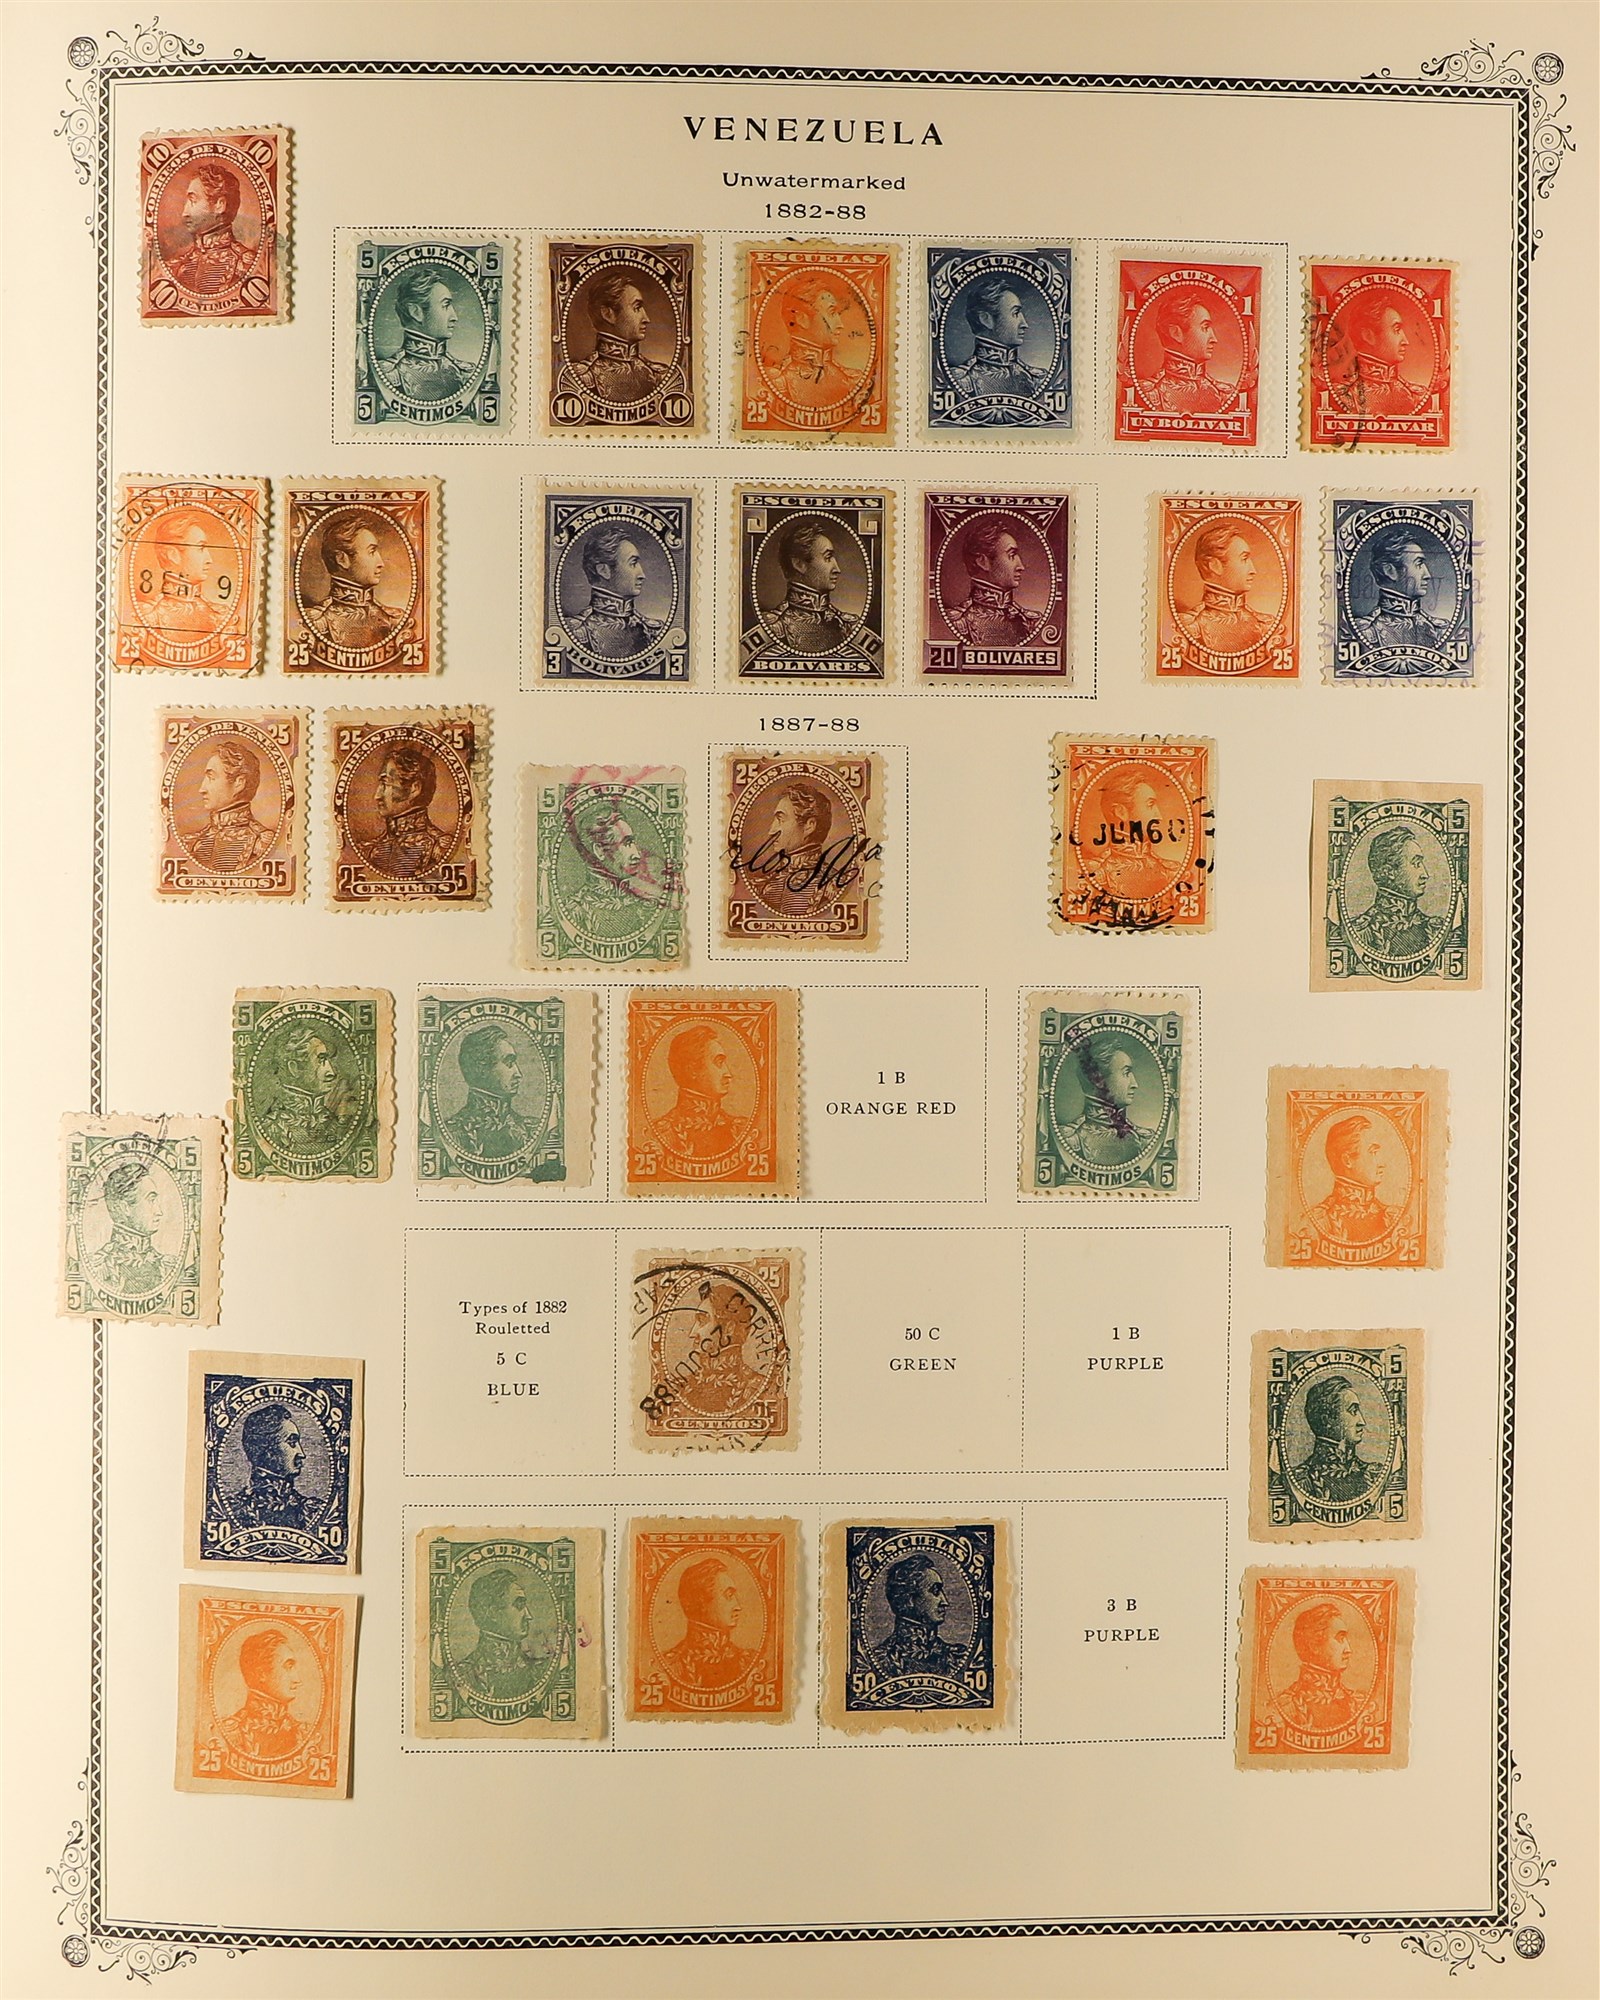 VENEZUELA 1859 - 1976 COLLECTION of 1500+ mint & used stamps in album, note 1859-62 Coat of Arms, - Image 5 of 19